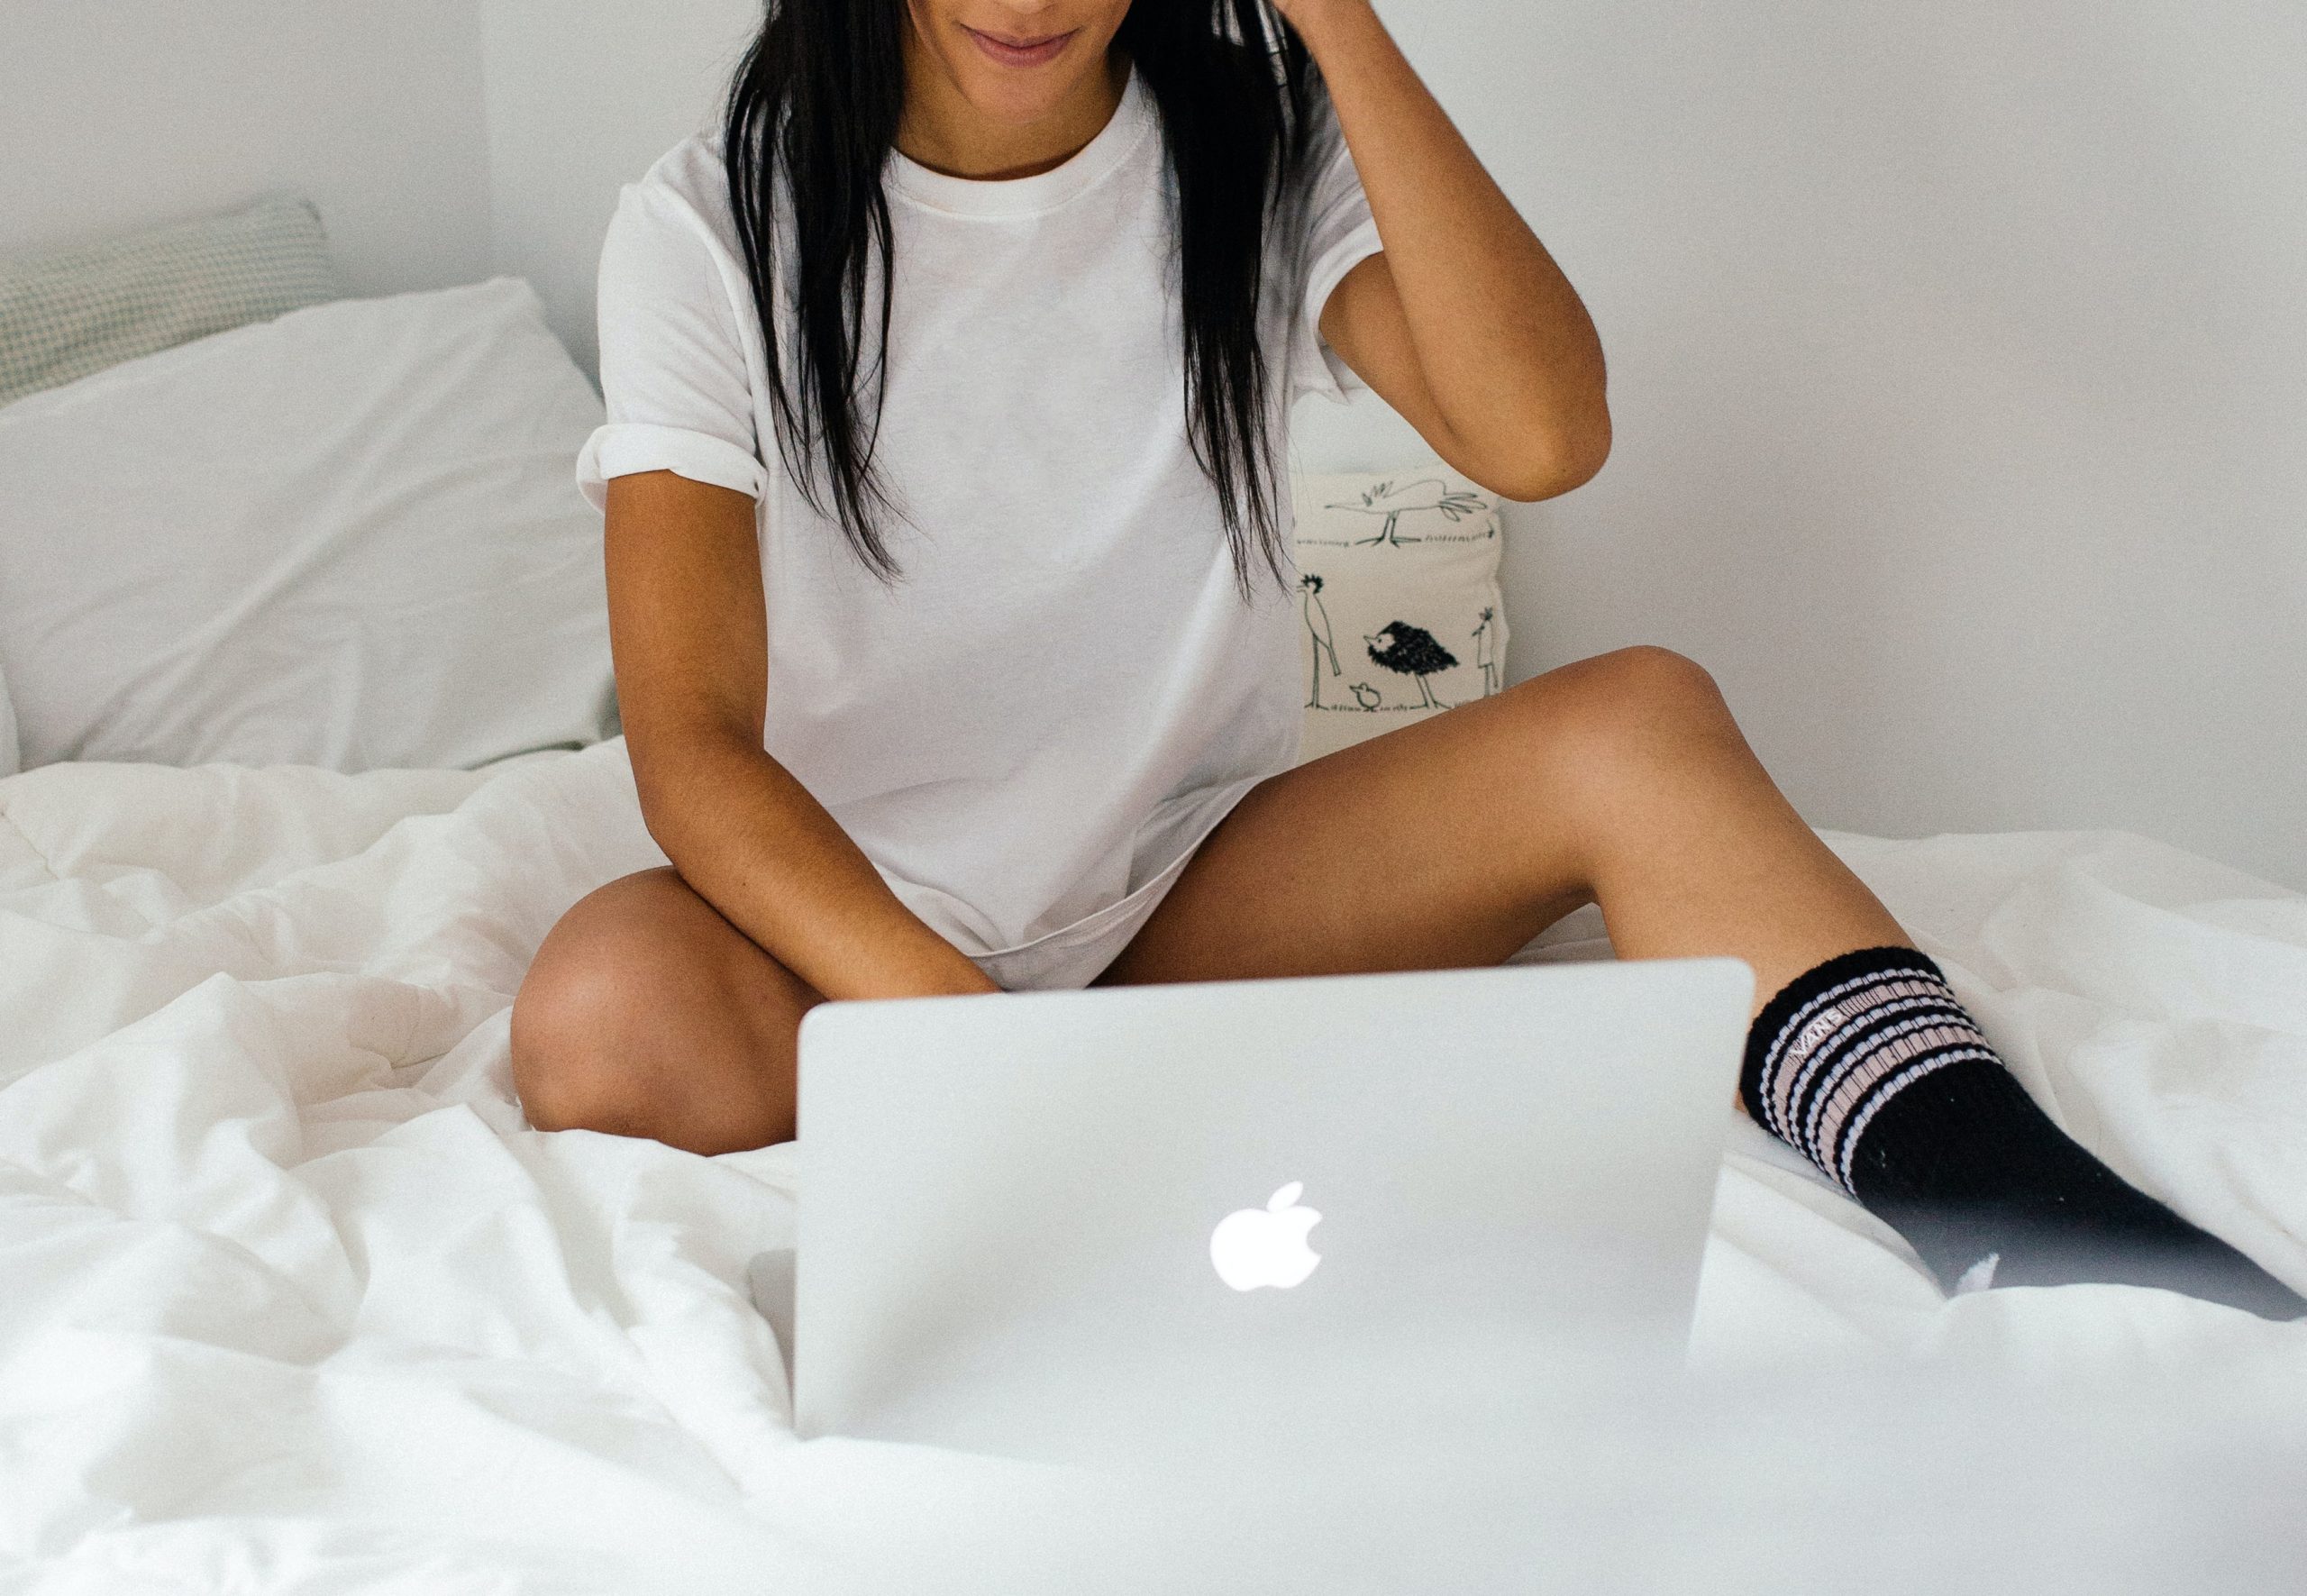 The Best Webcam Modelling Agencies To Work For In 2022